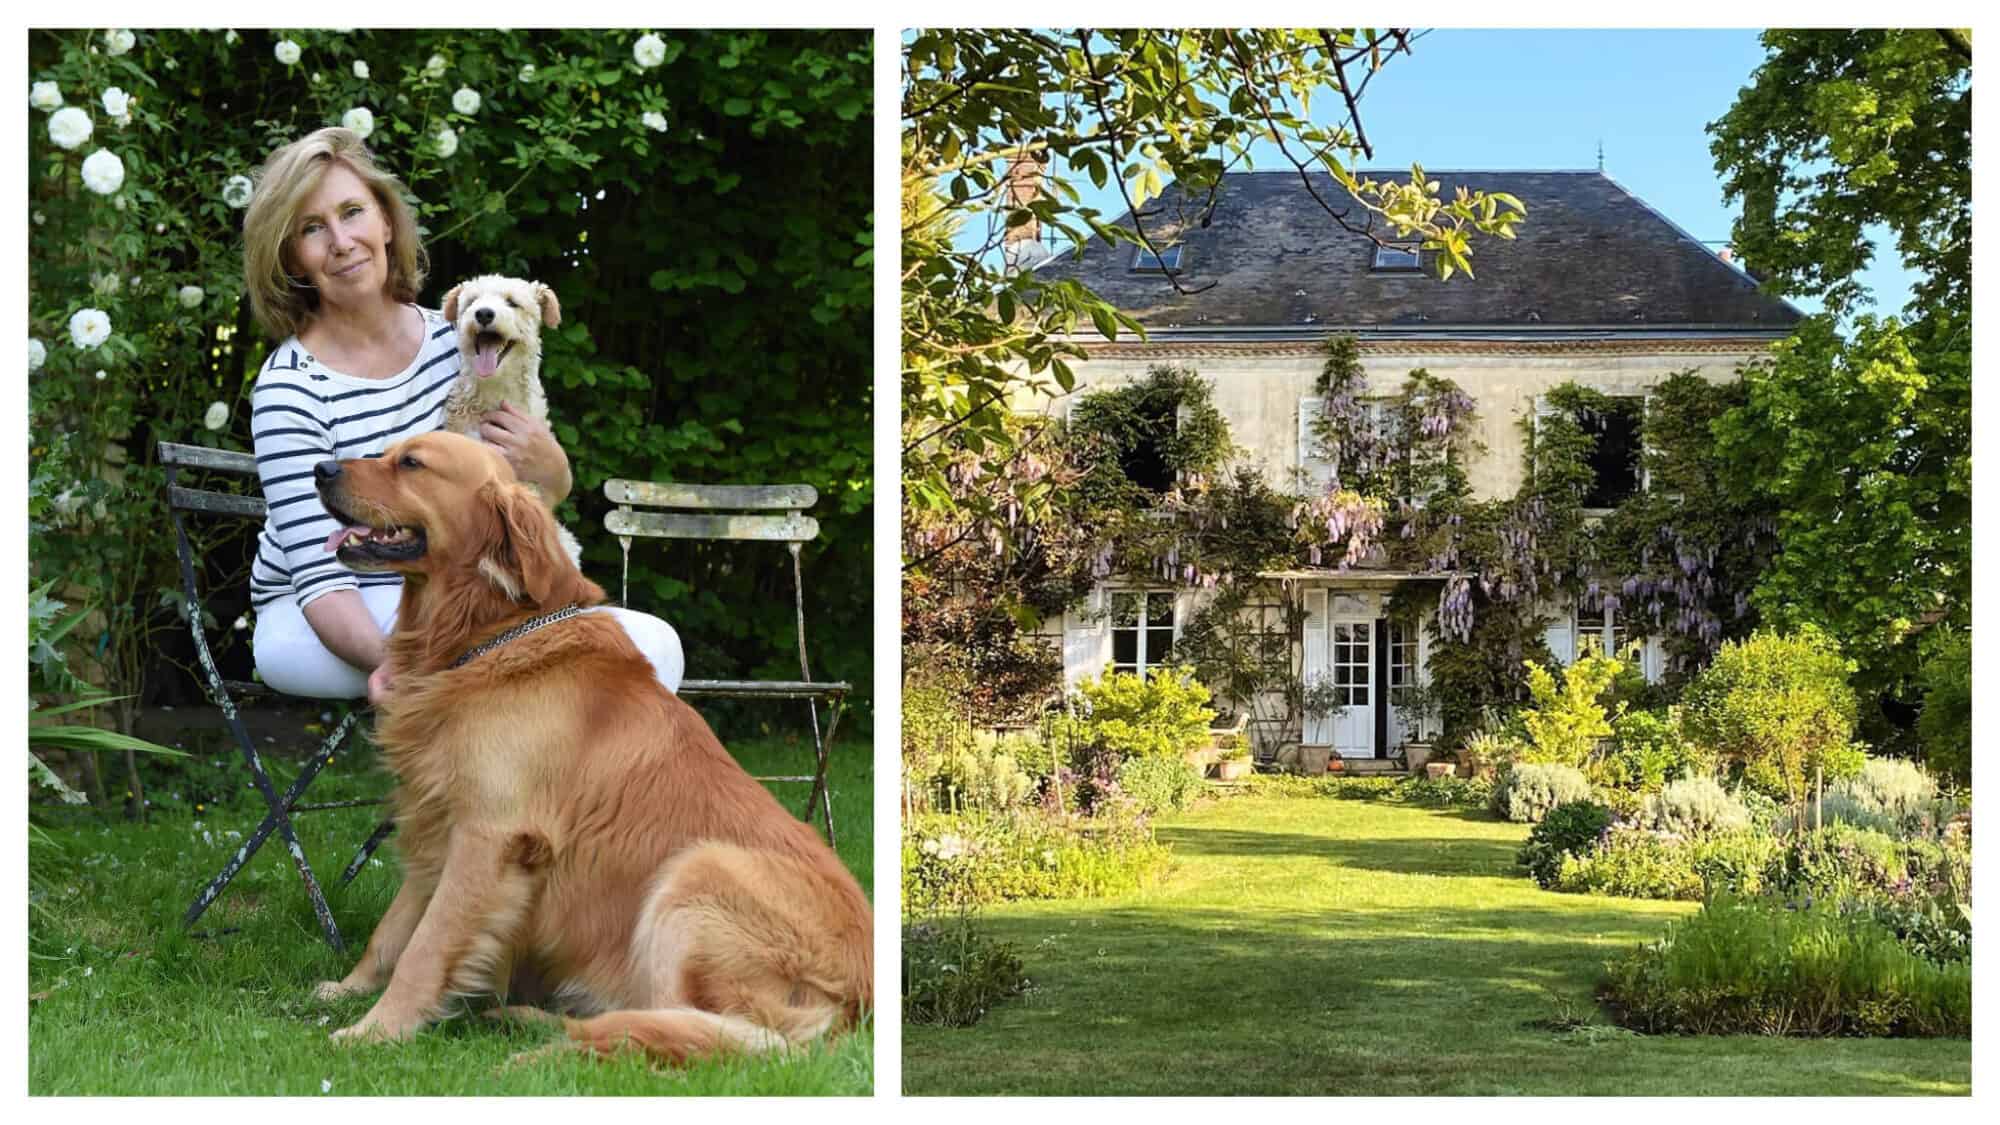 Left, Sharon Santoni and her two dogs out in the garden. Right: a magical Normandy home draped in flowers and plants.